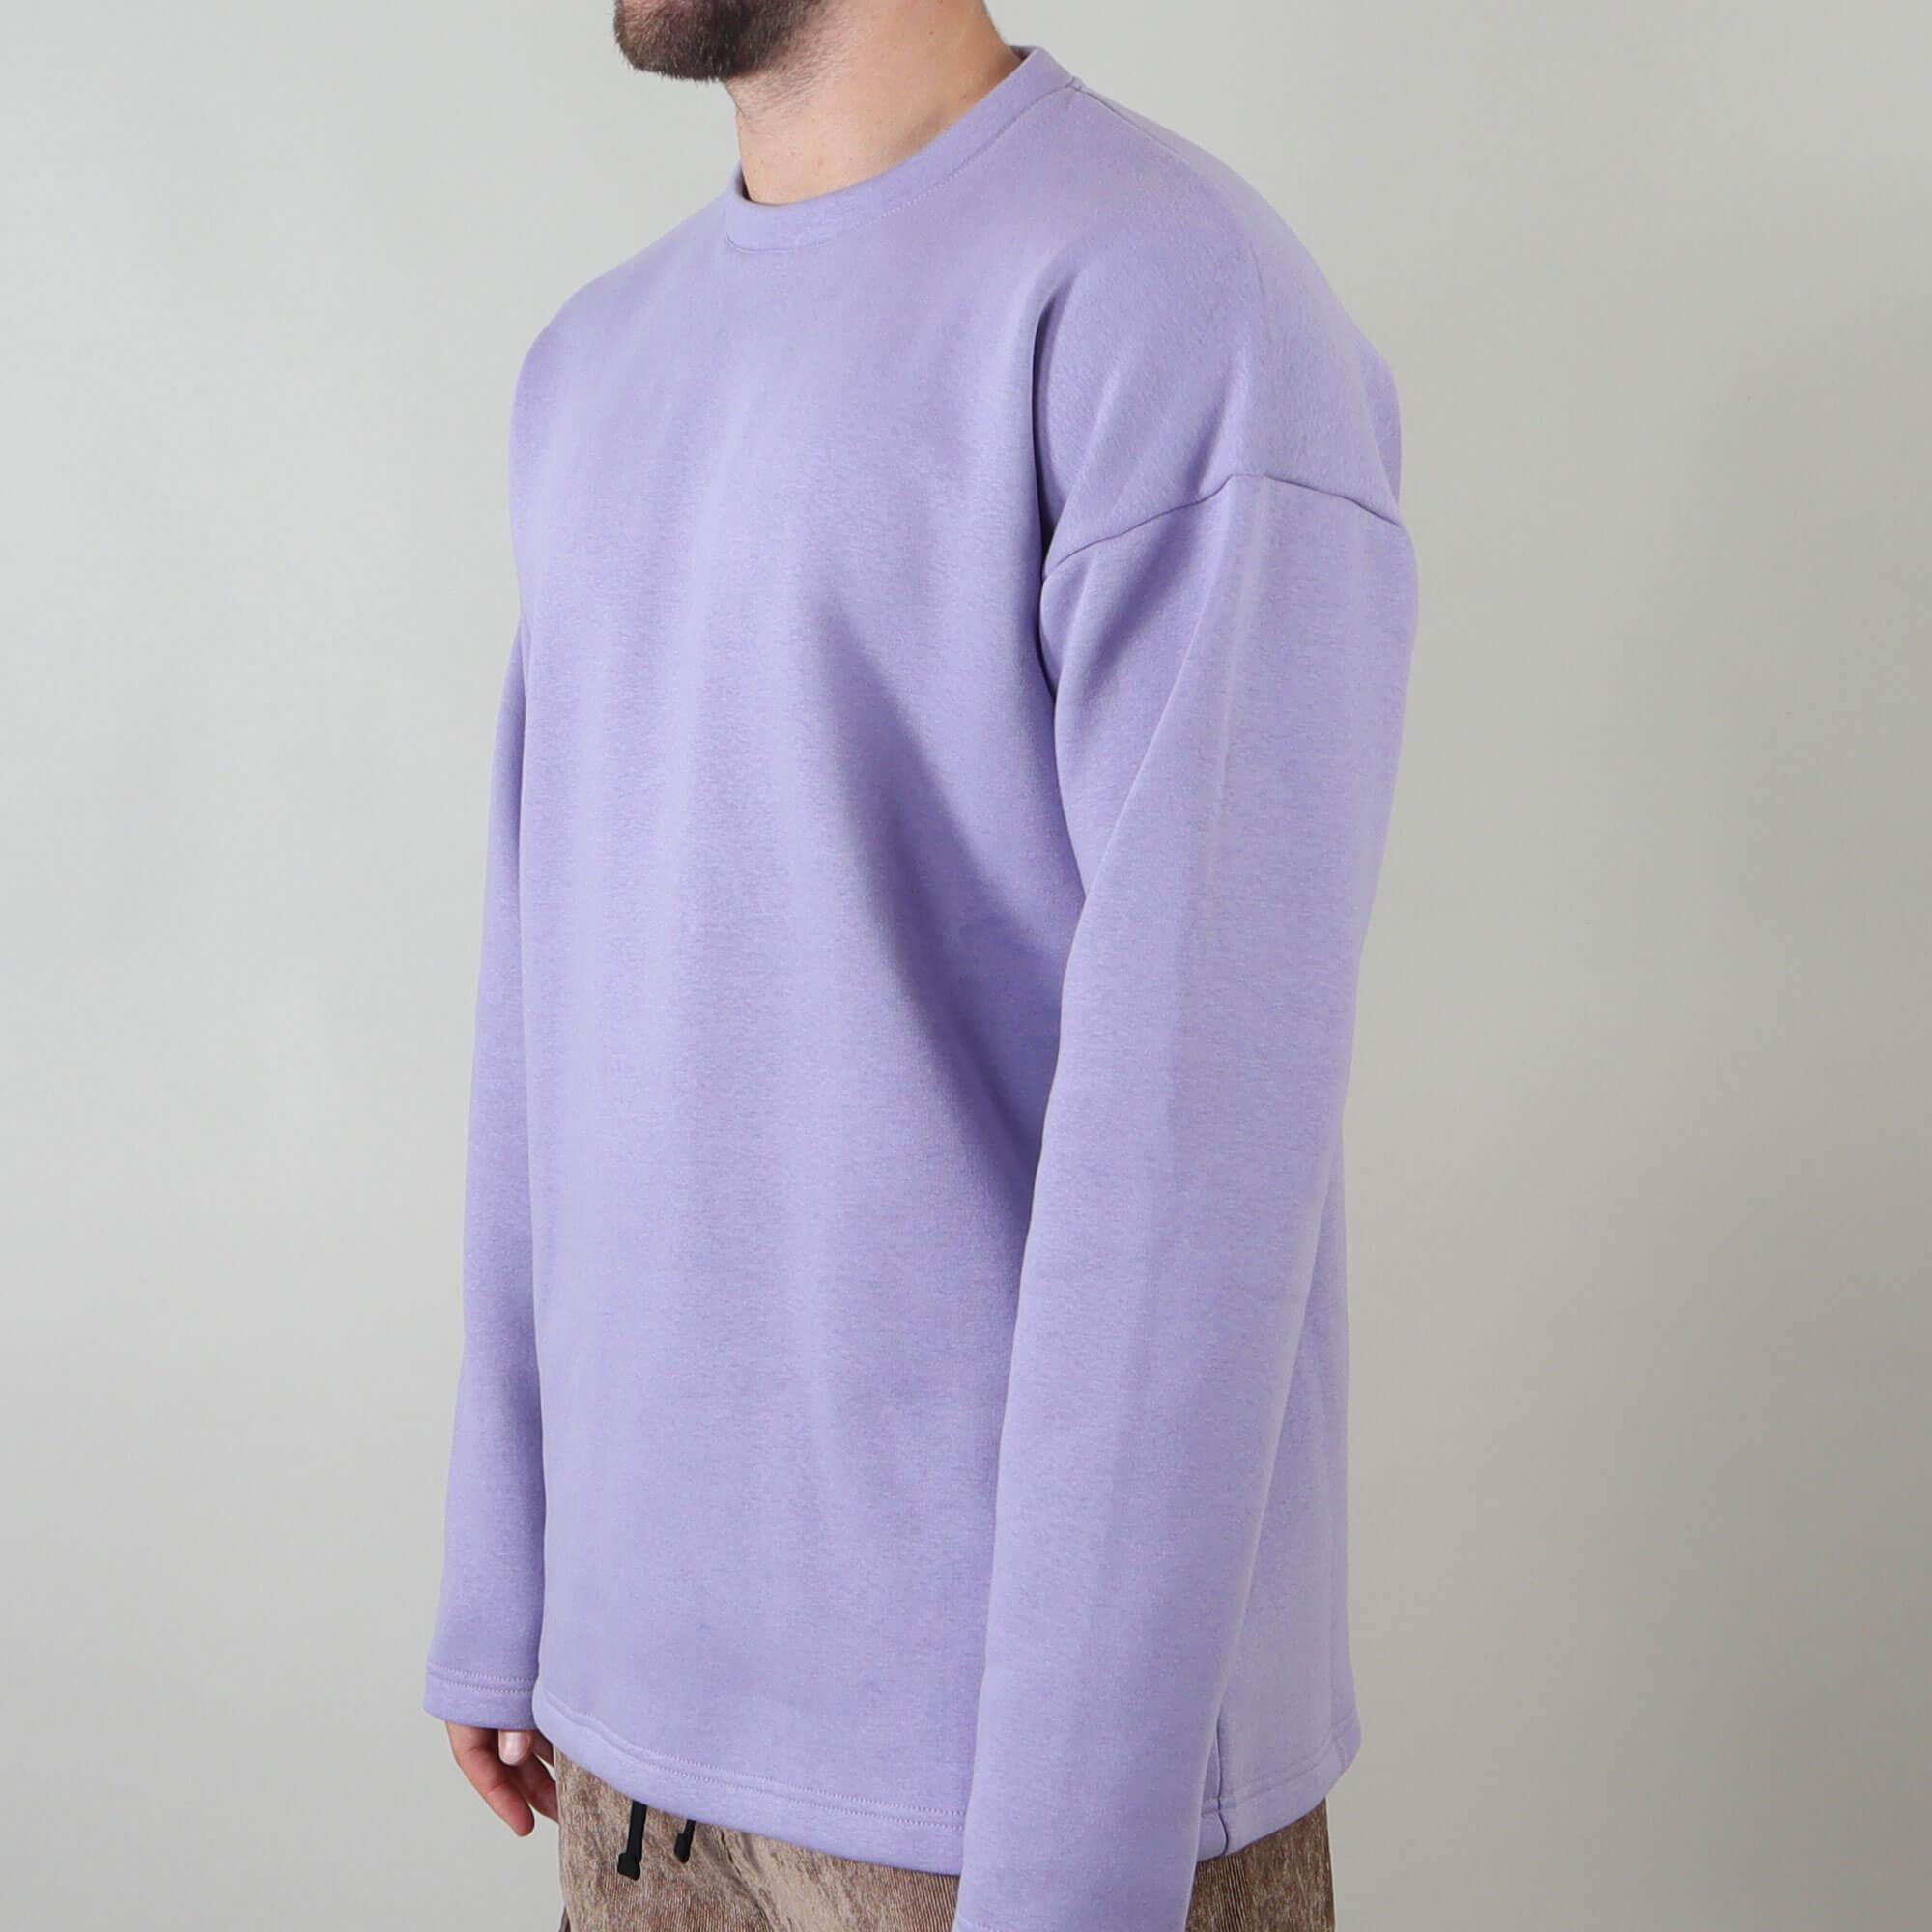 PRJCT sweater lila / SOLD OUT